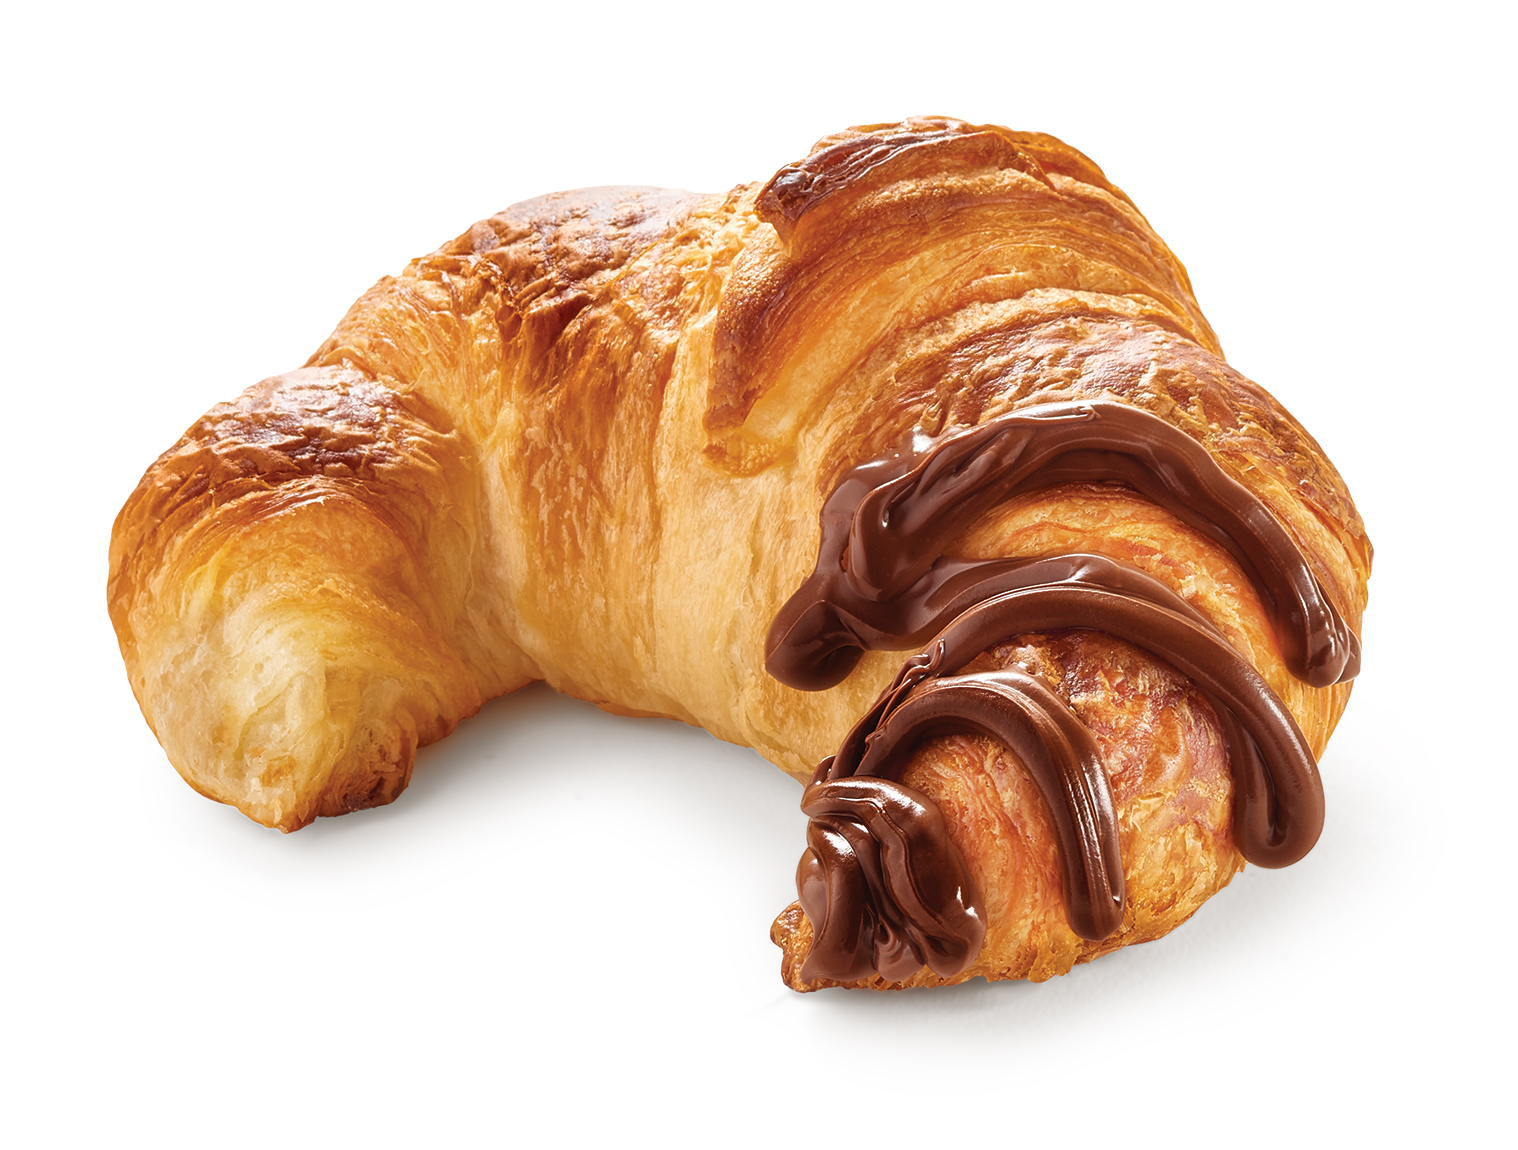 Oven Delights Classic Croissant with Spread Delights spread on top